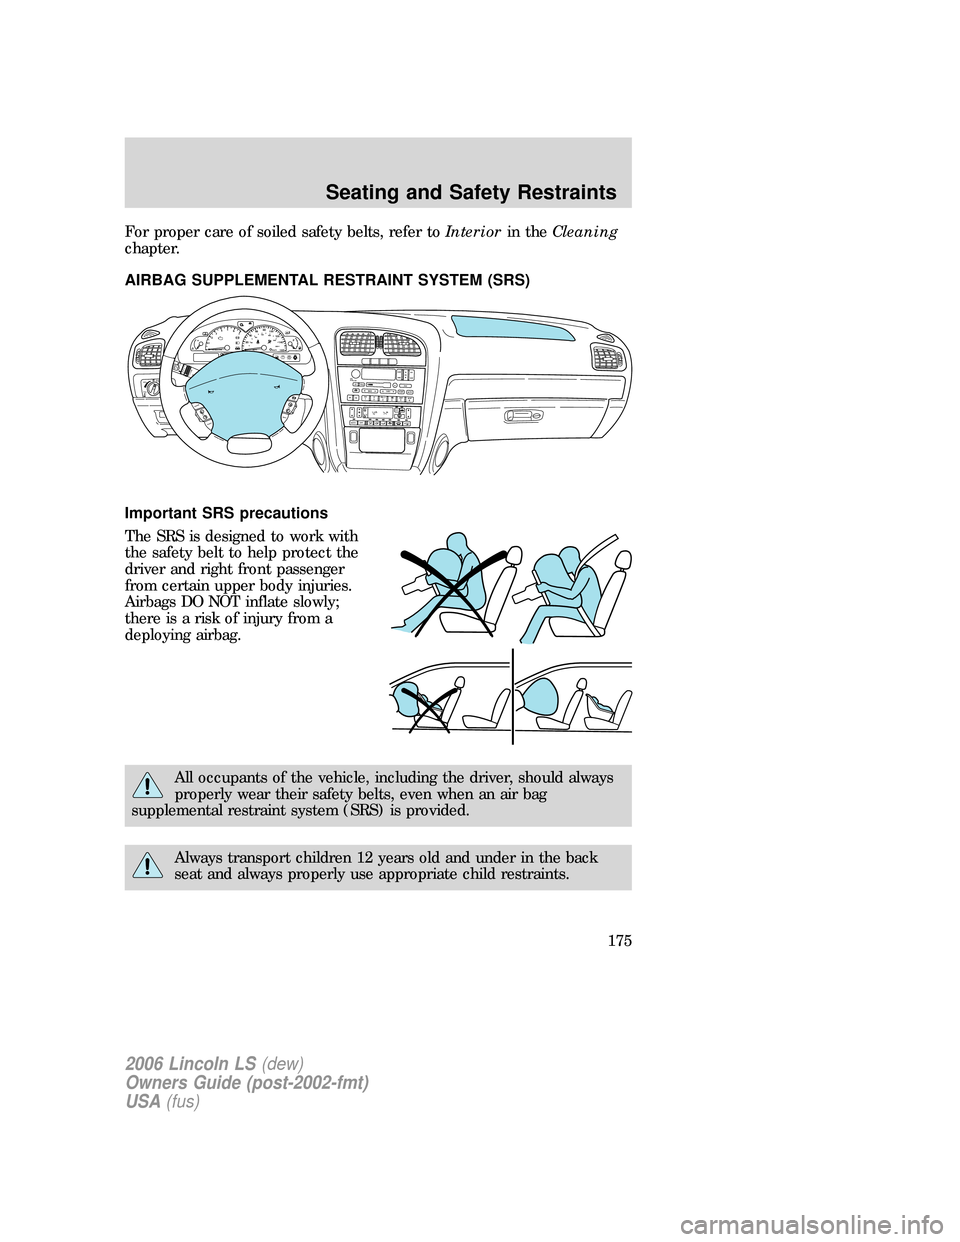 LINCOLN LS 2006  Owners Manual For proper care of soiled safety belts, refer toInteriorin theCleaning
chapter.
AIRBAG SUPPLEMENTAL RESTRAINT SYSTEM (SRS)
Important SRS precautions
The SRS is designed to work with
the safety belt to